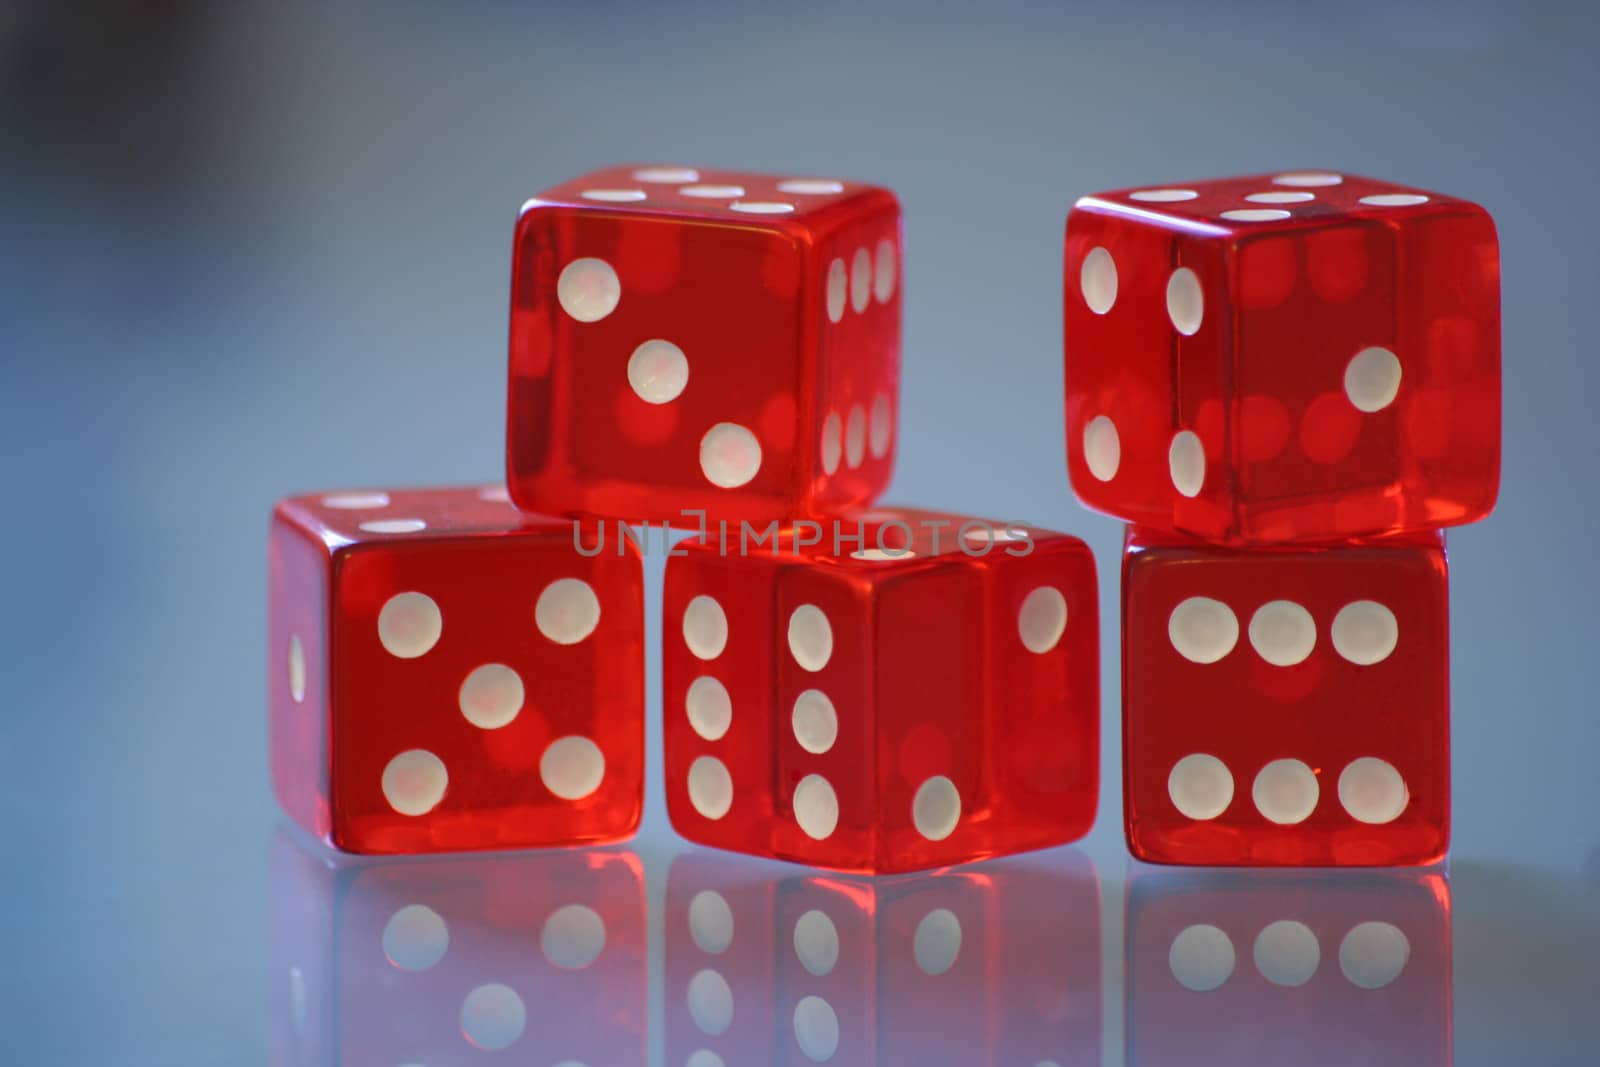 Red dice by evdayan